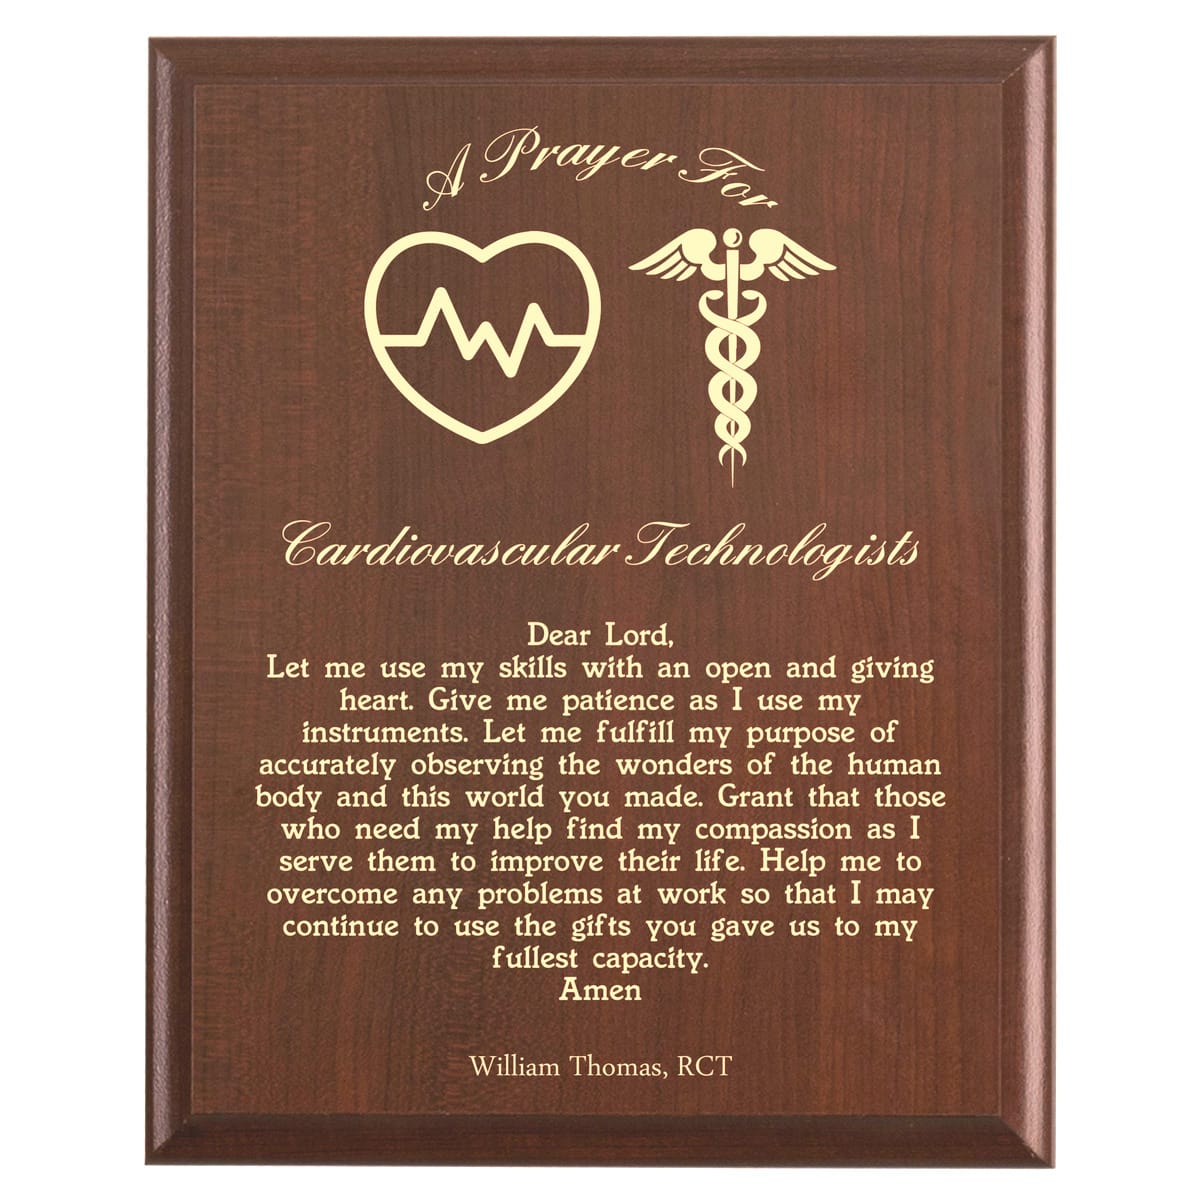 Plaque photo: Cardiovascular Technologist Prayer Plaque design with free personalization. Wood style finish with customized text.